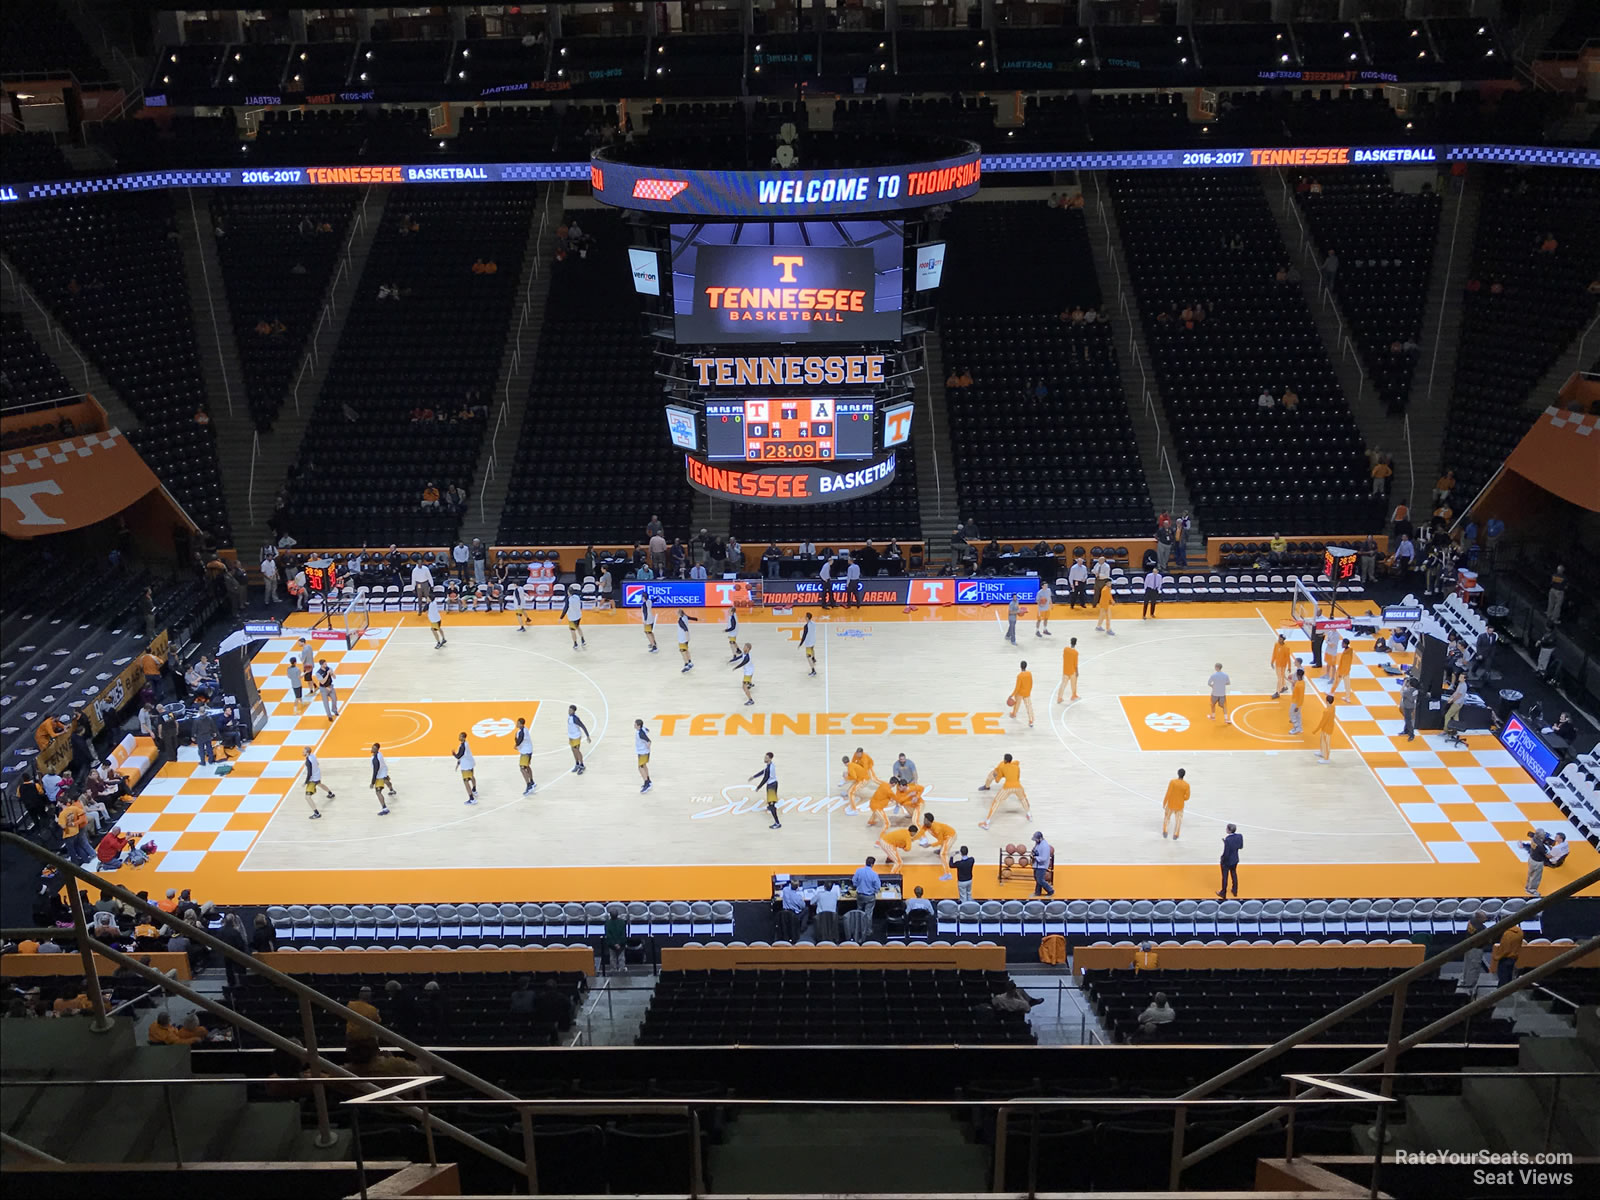 section 321, row 7 seat view  - thompson-boling arena